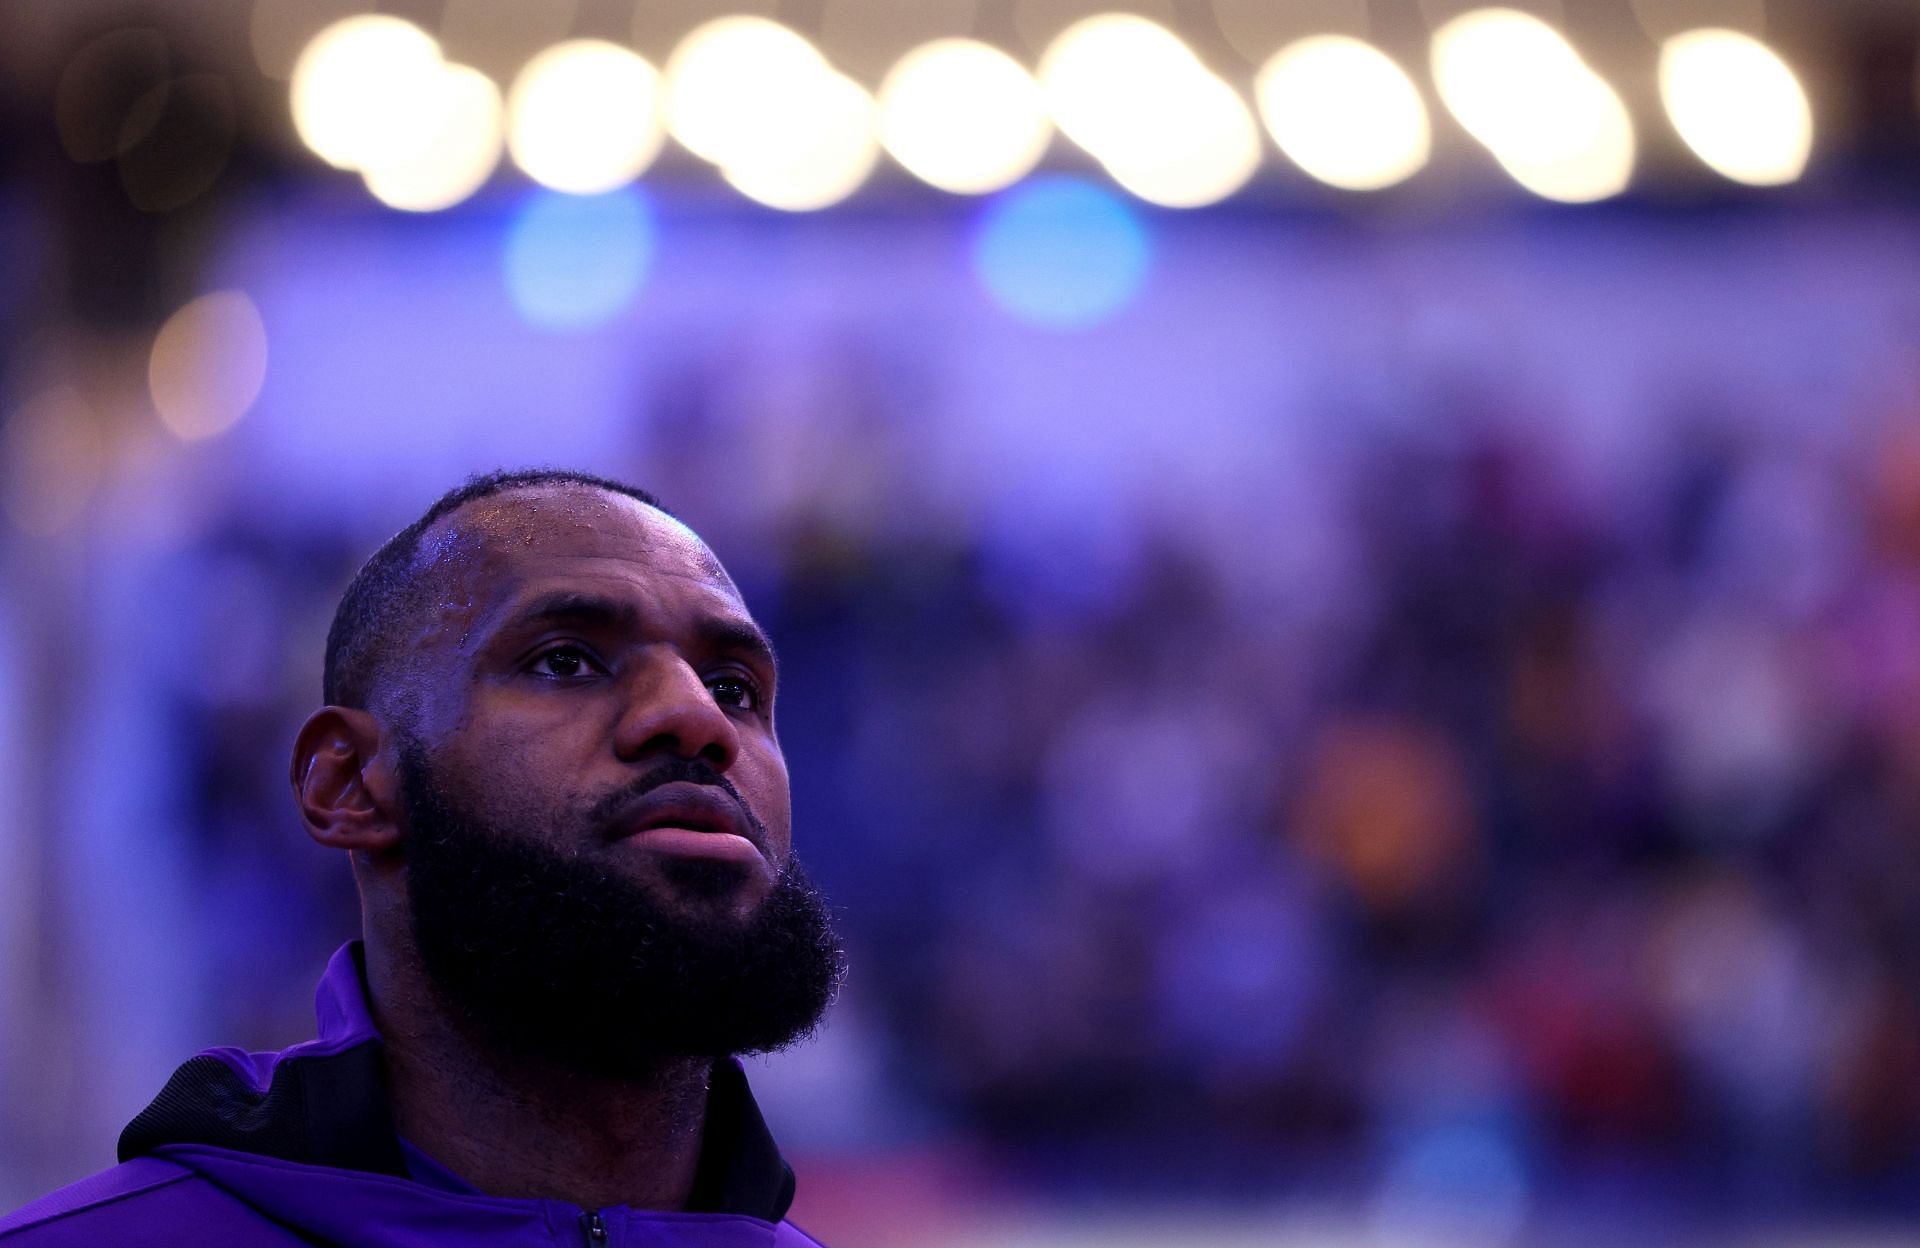 LeBron James #6 of the Los Angeles Lakers before the 124-116 OT win against the Indiana Pacers at Gainbridge Fieldhouse on November 24, 2021 in Indianapolis, Indiana.